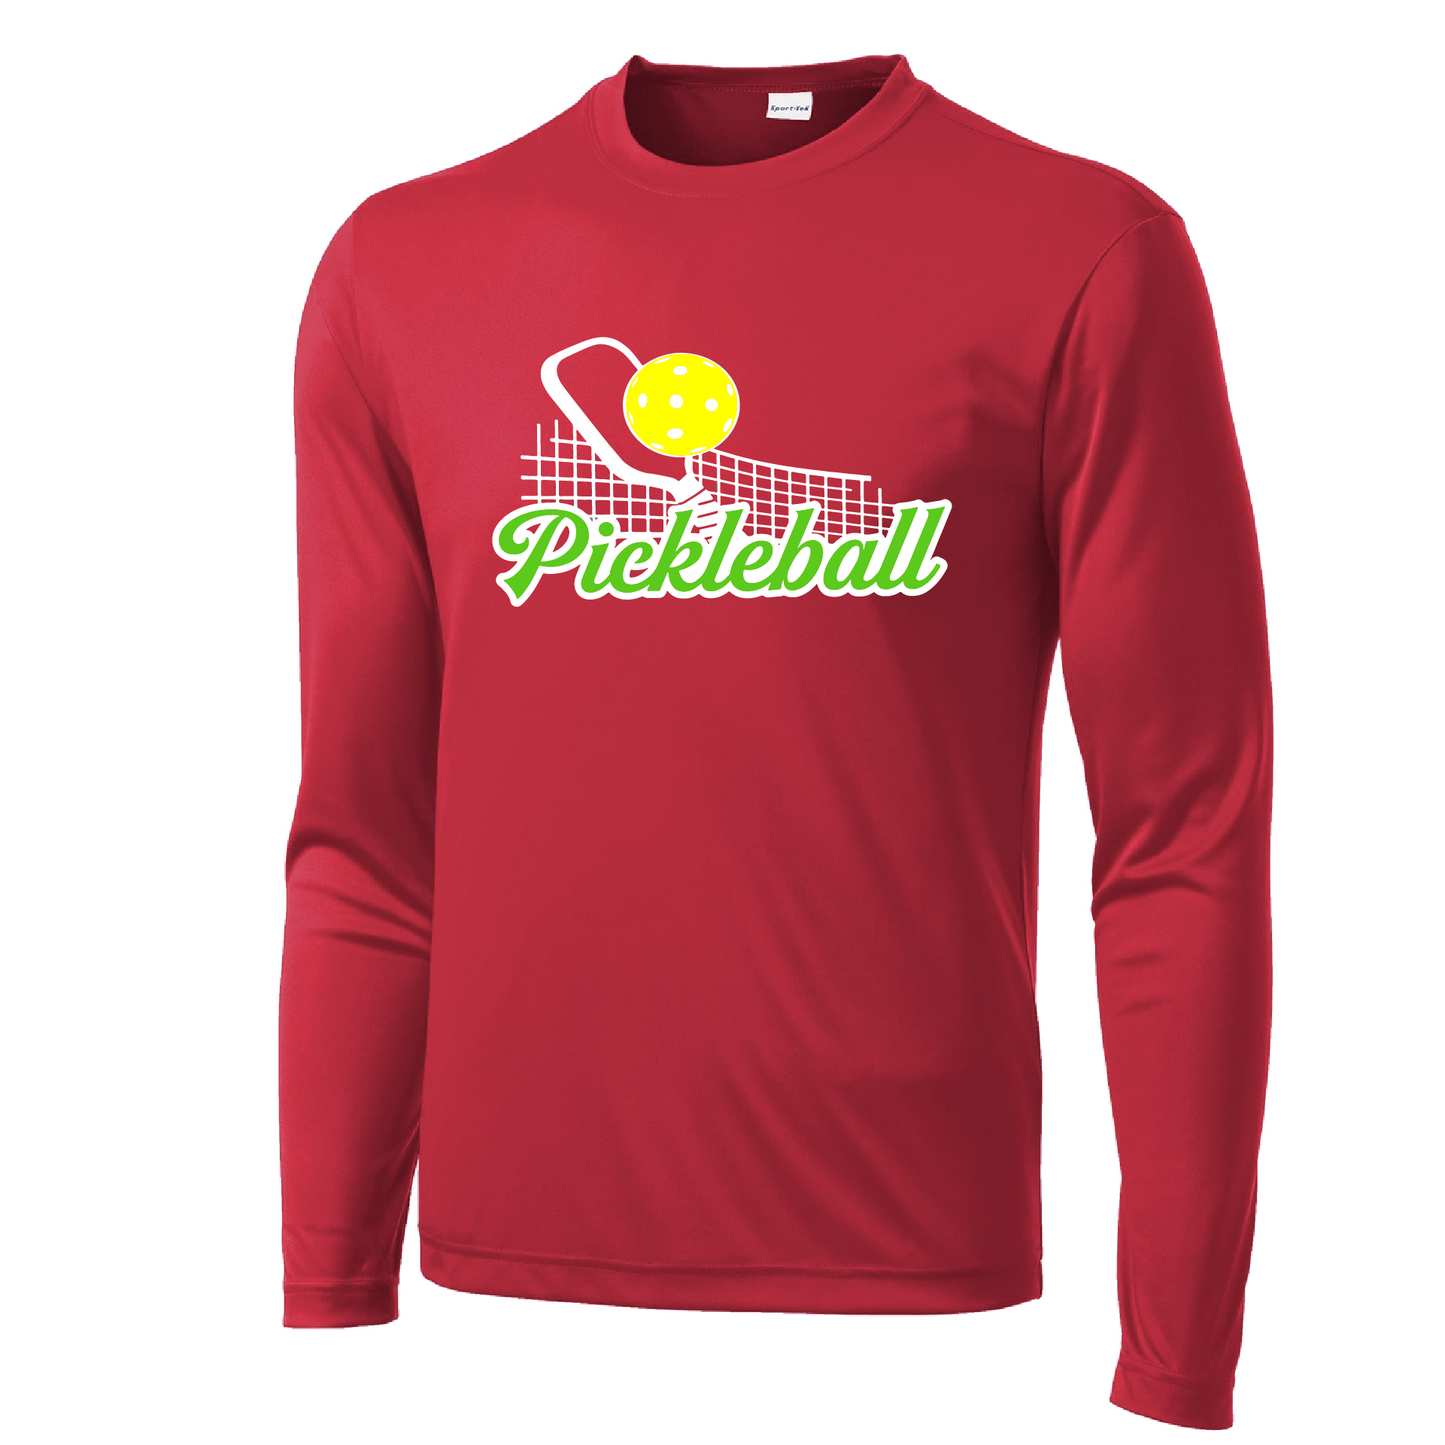 Pickleball Design: Pickleball Net  Men's Style: Long Sleeve  Shirts are lightweight, roomy and highly breathable. These moisture-wicking shirts are designed for athletic performance. They feature PosiCharge technology to lock in color and prevent logos from fading. Removable tag and set-in sleeves for comfort